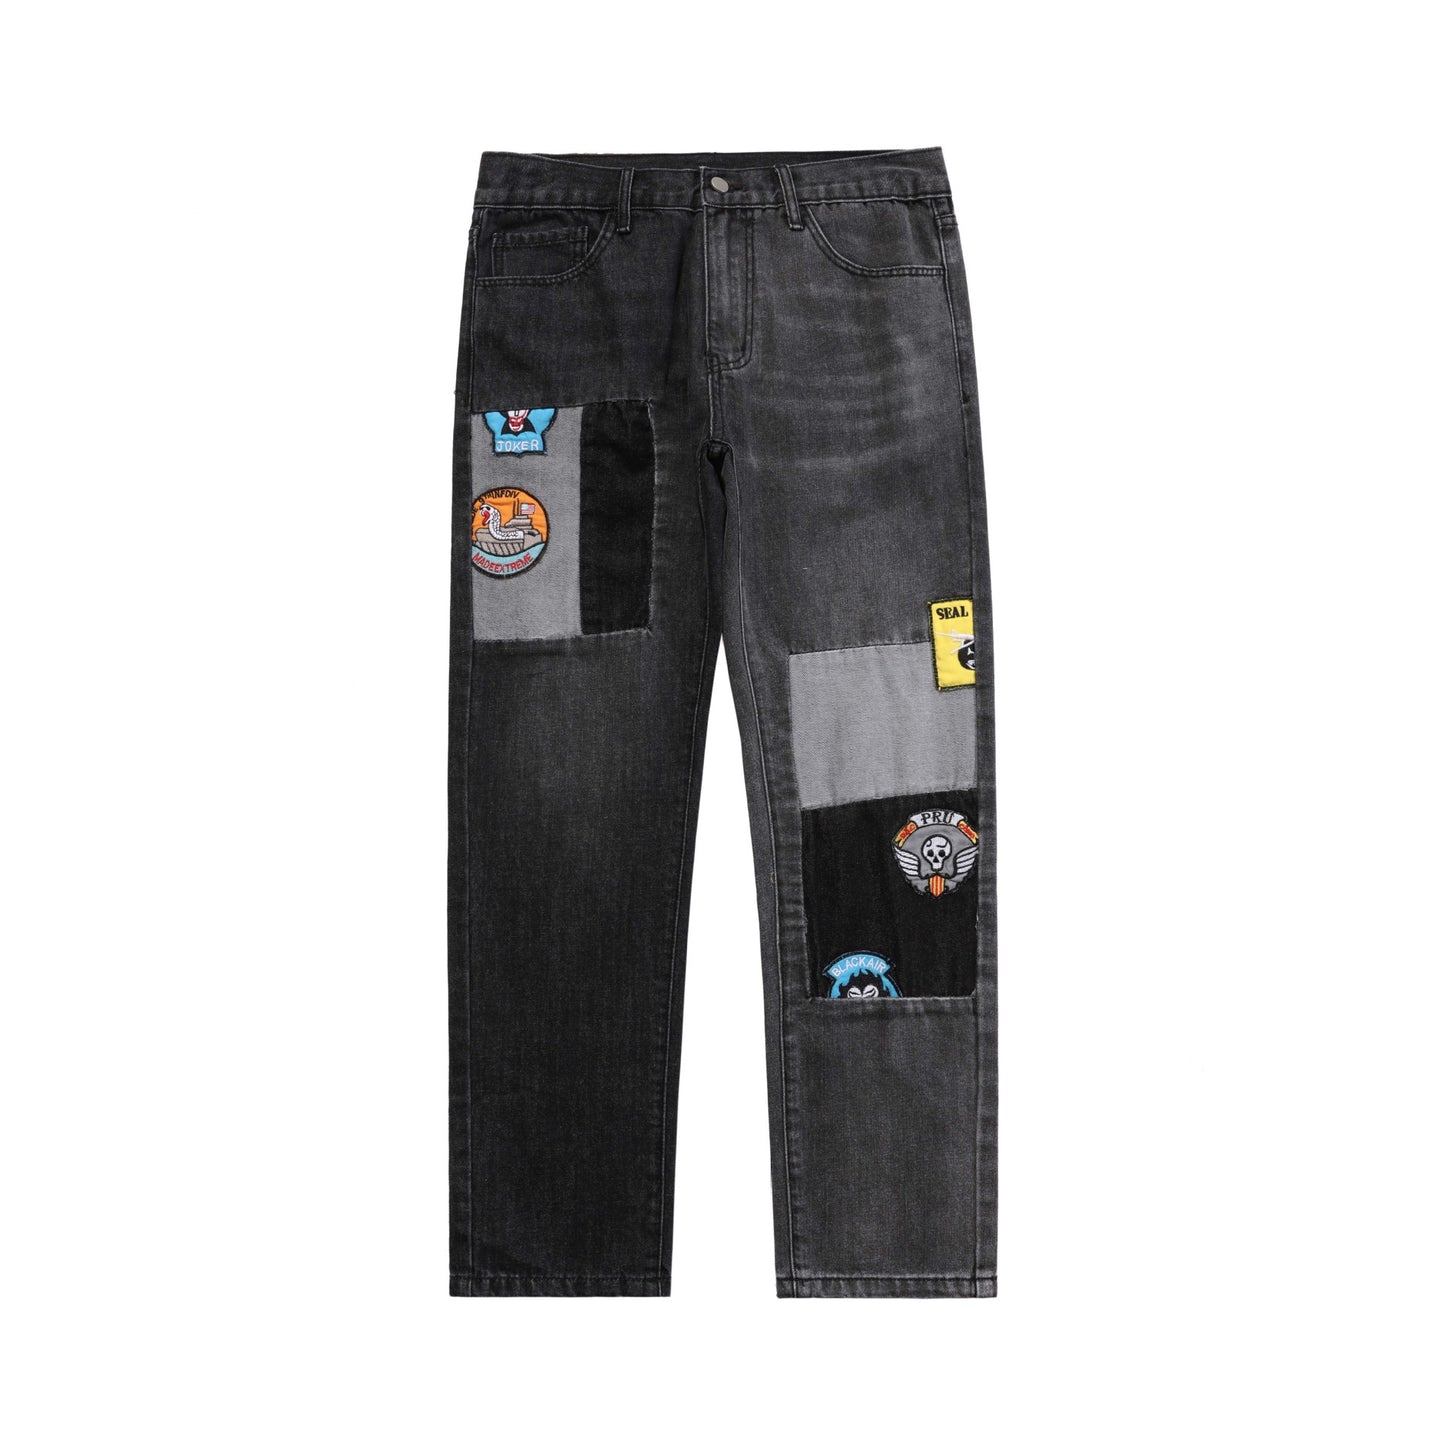 MADE ETREME Jeans